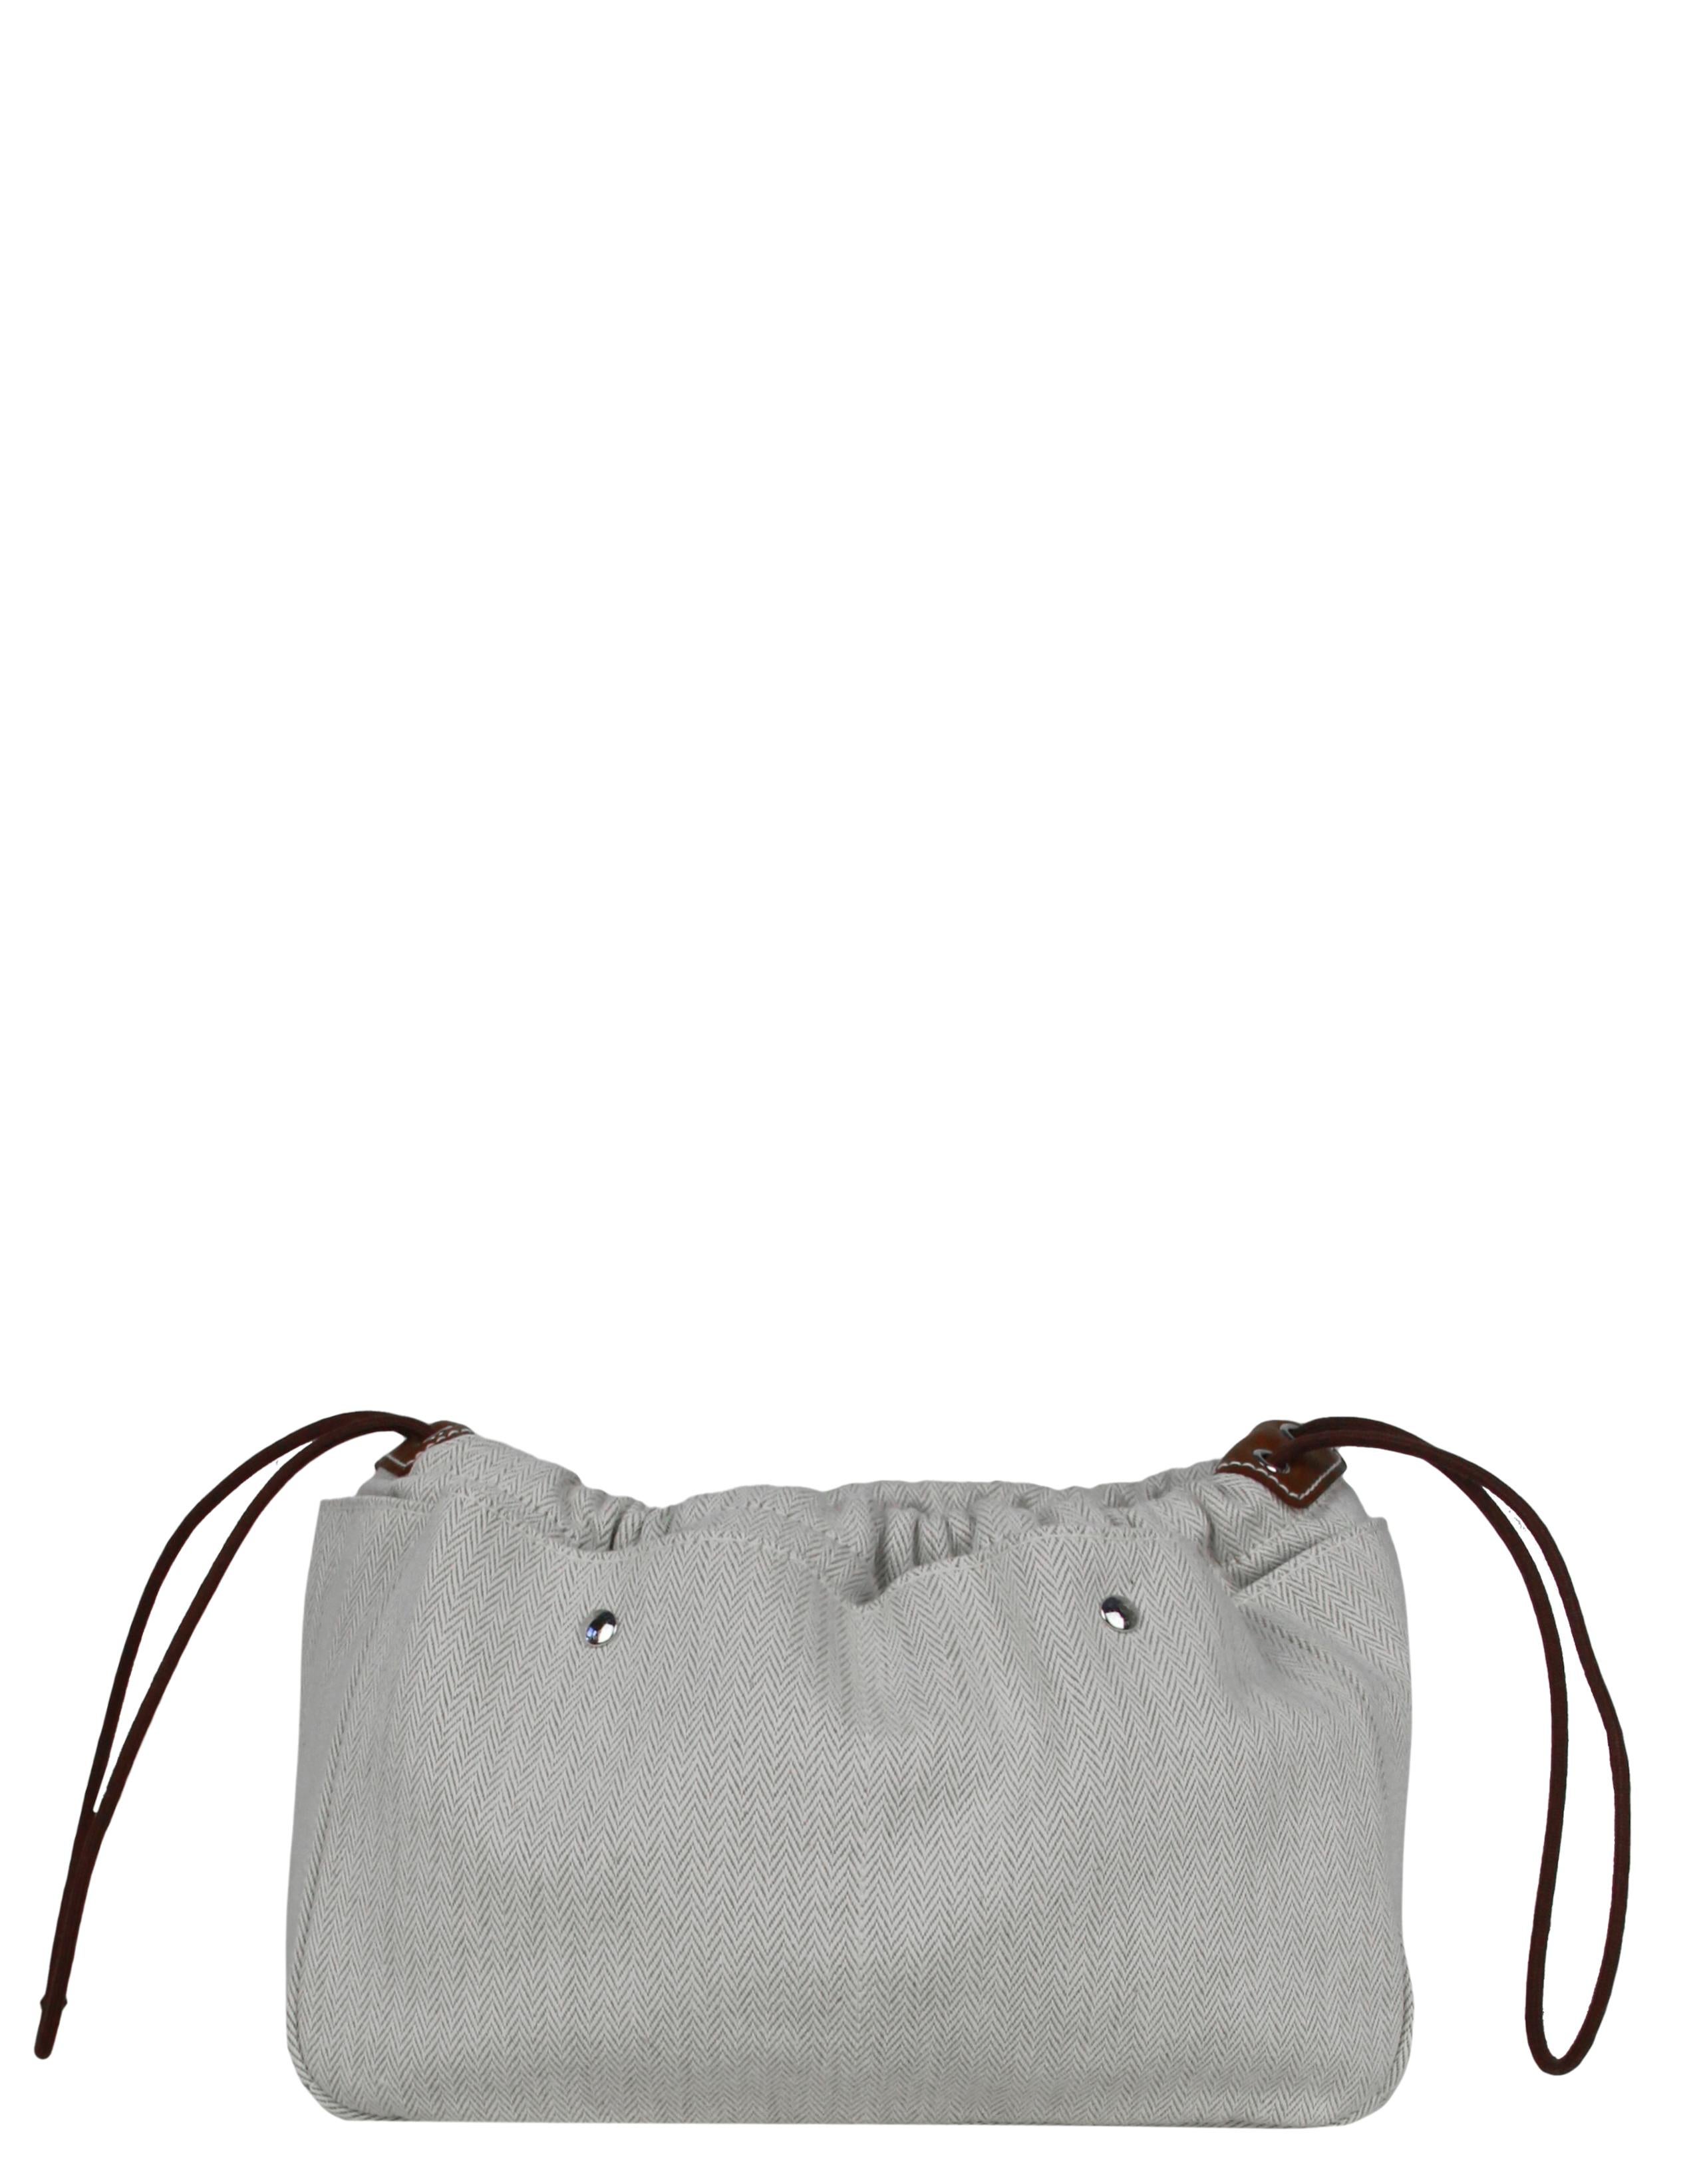 Hermes Natural Dauve Canvas Barenia Fourbi 25 MM Bag Insert

Made In: France
Color: Natural, fauve
Hardware: Palladium
Materials: Cotton canvas and barenia leather
Lining: Cotton canvas
Closure/Opening: Drawstring
Exterior pockets: Three snap